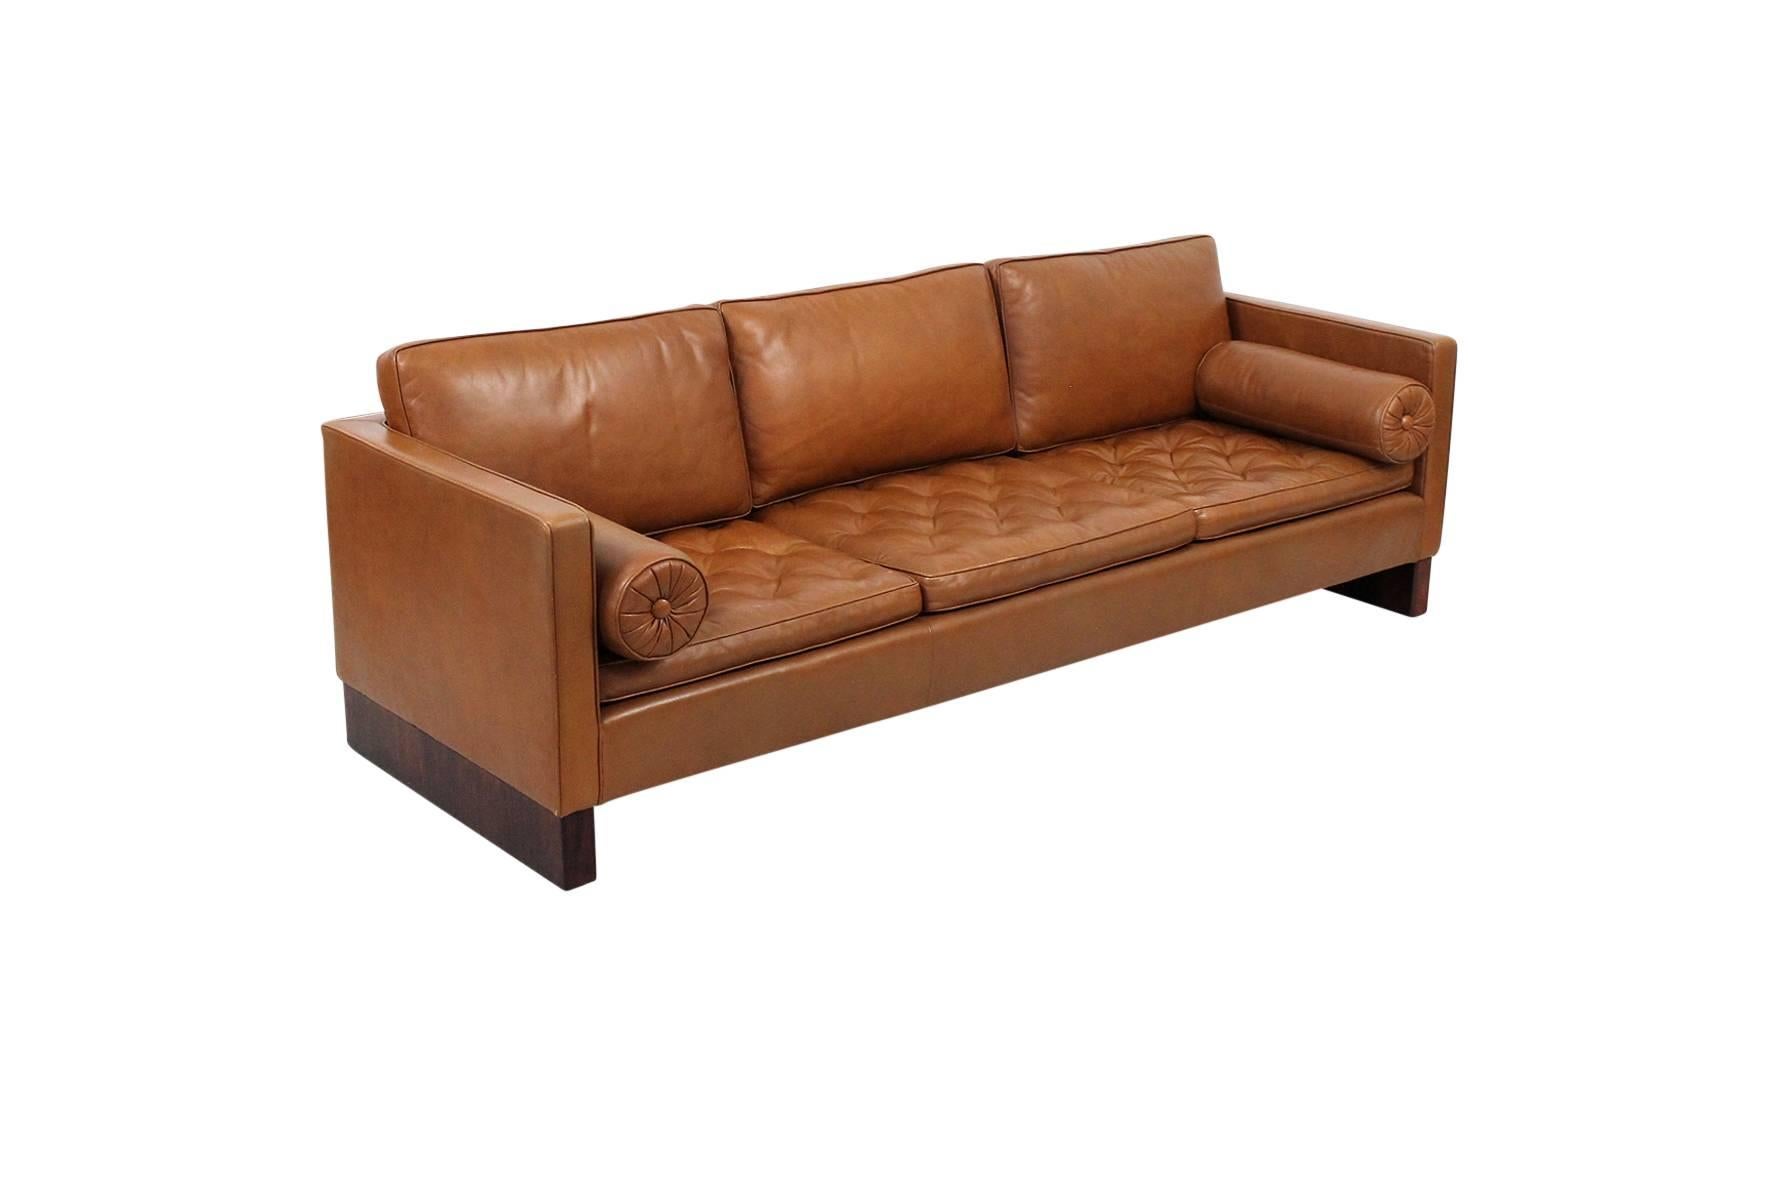 Ludwig Mies van der Rohe designed sofa for Knoll. Sofa features tufted leather seat cushions, two circular bolsters and rosewood legs. Elegant and comfortable piece in original brown leather.